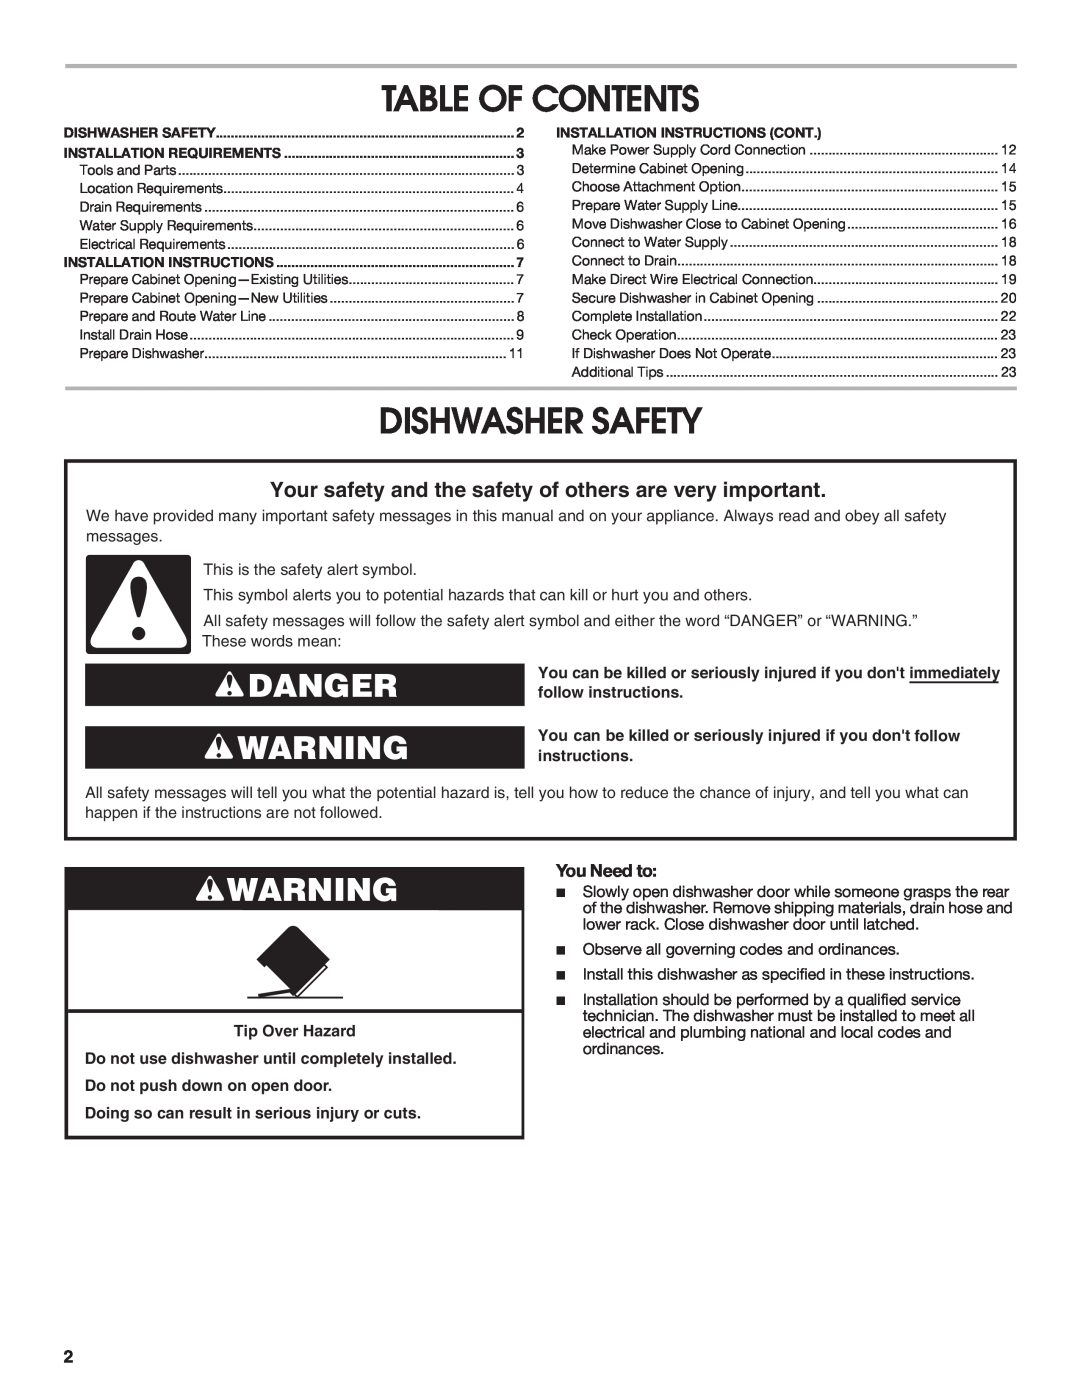 Whirlpool W10435039A installation instructions Table Of Contents, Dishwasher Safety, You Need to, Tip Over Hazard, Danger 